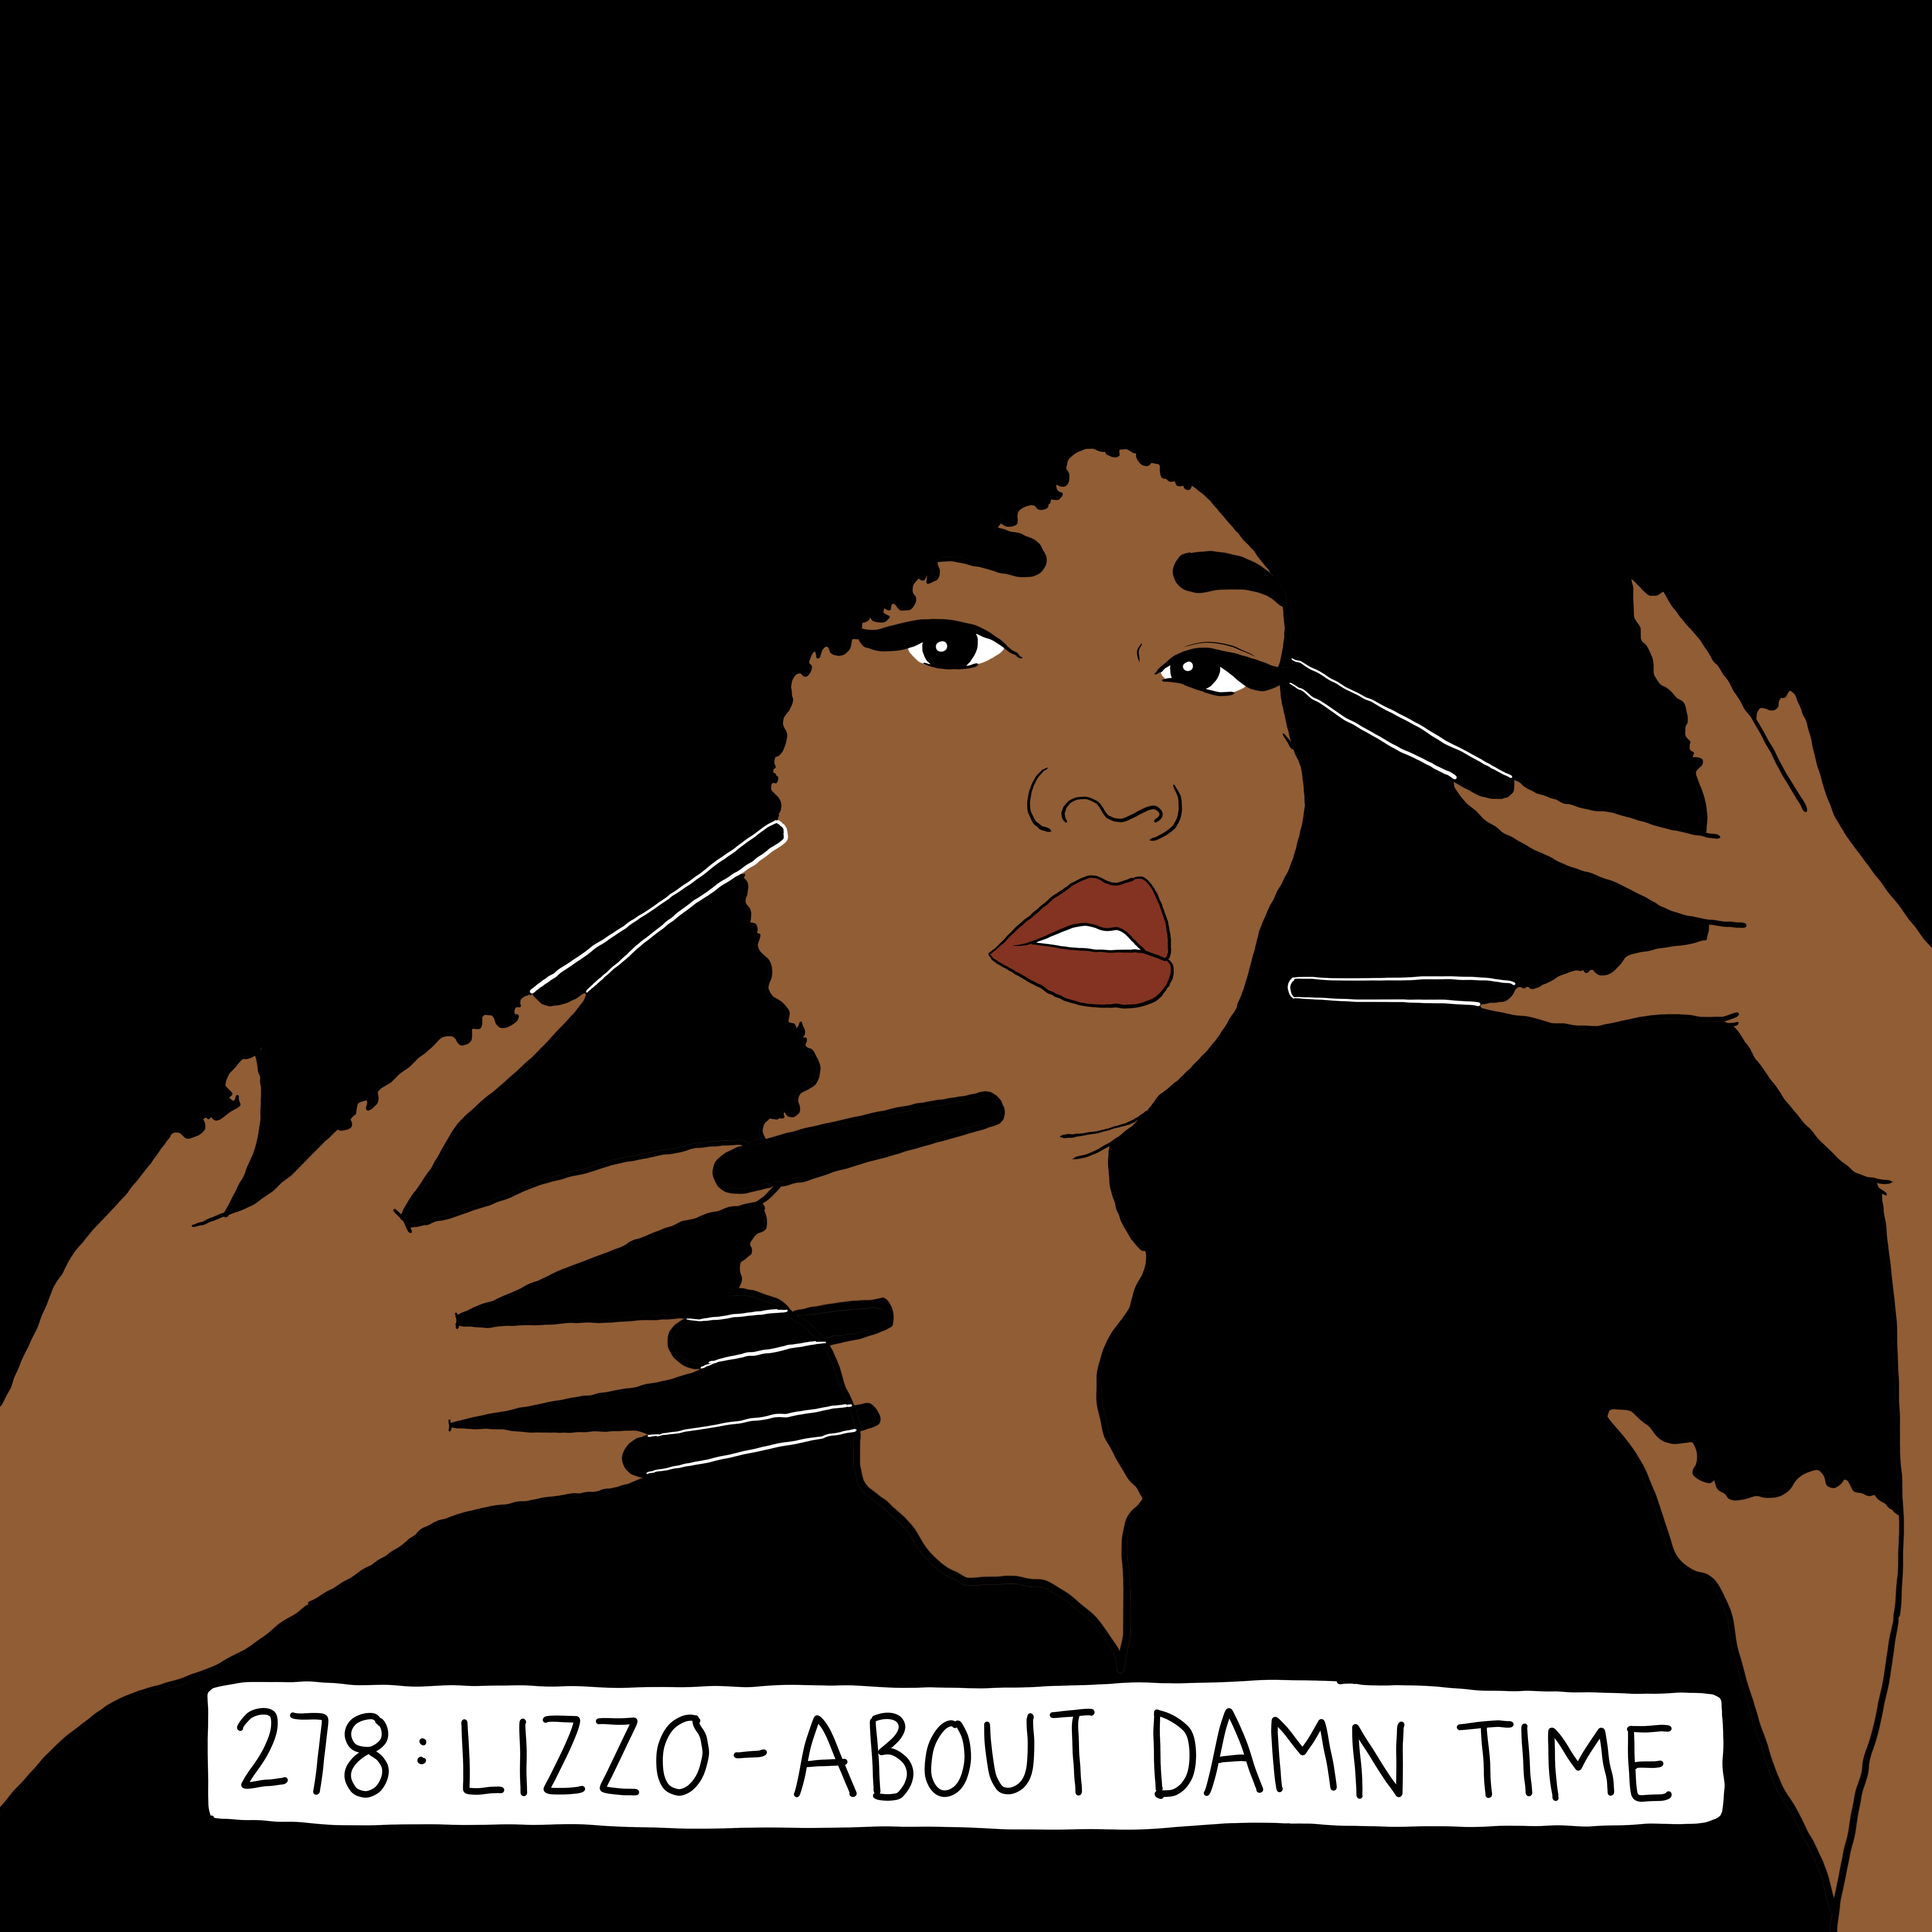 ”It’s About Damn Time” for Another Lizzo #1